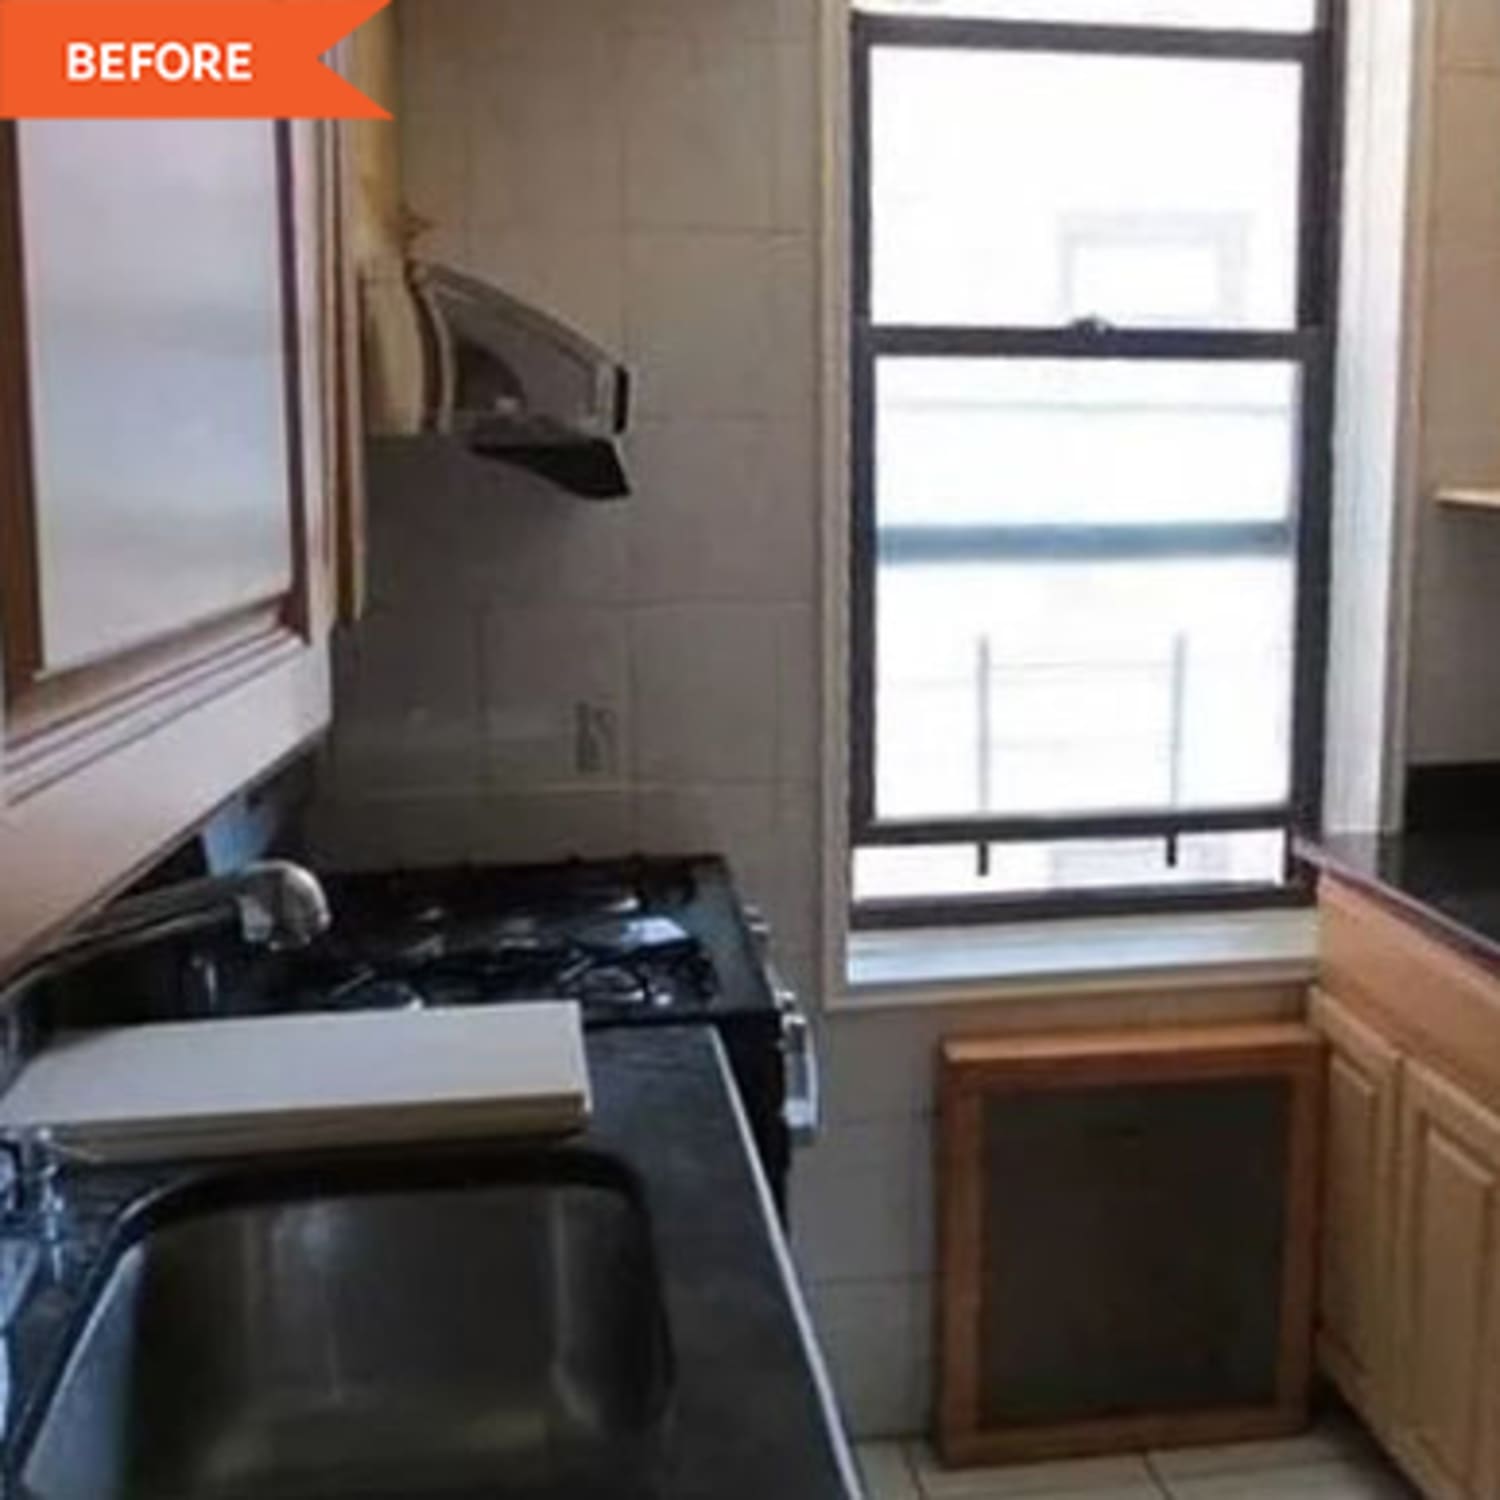 Galley Kitchen Makeover   Before and After Photos   Apartment Therapy